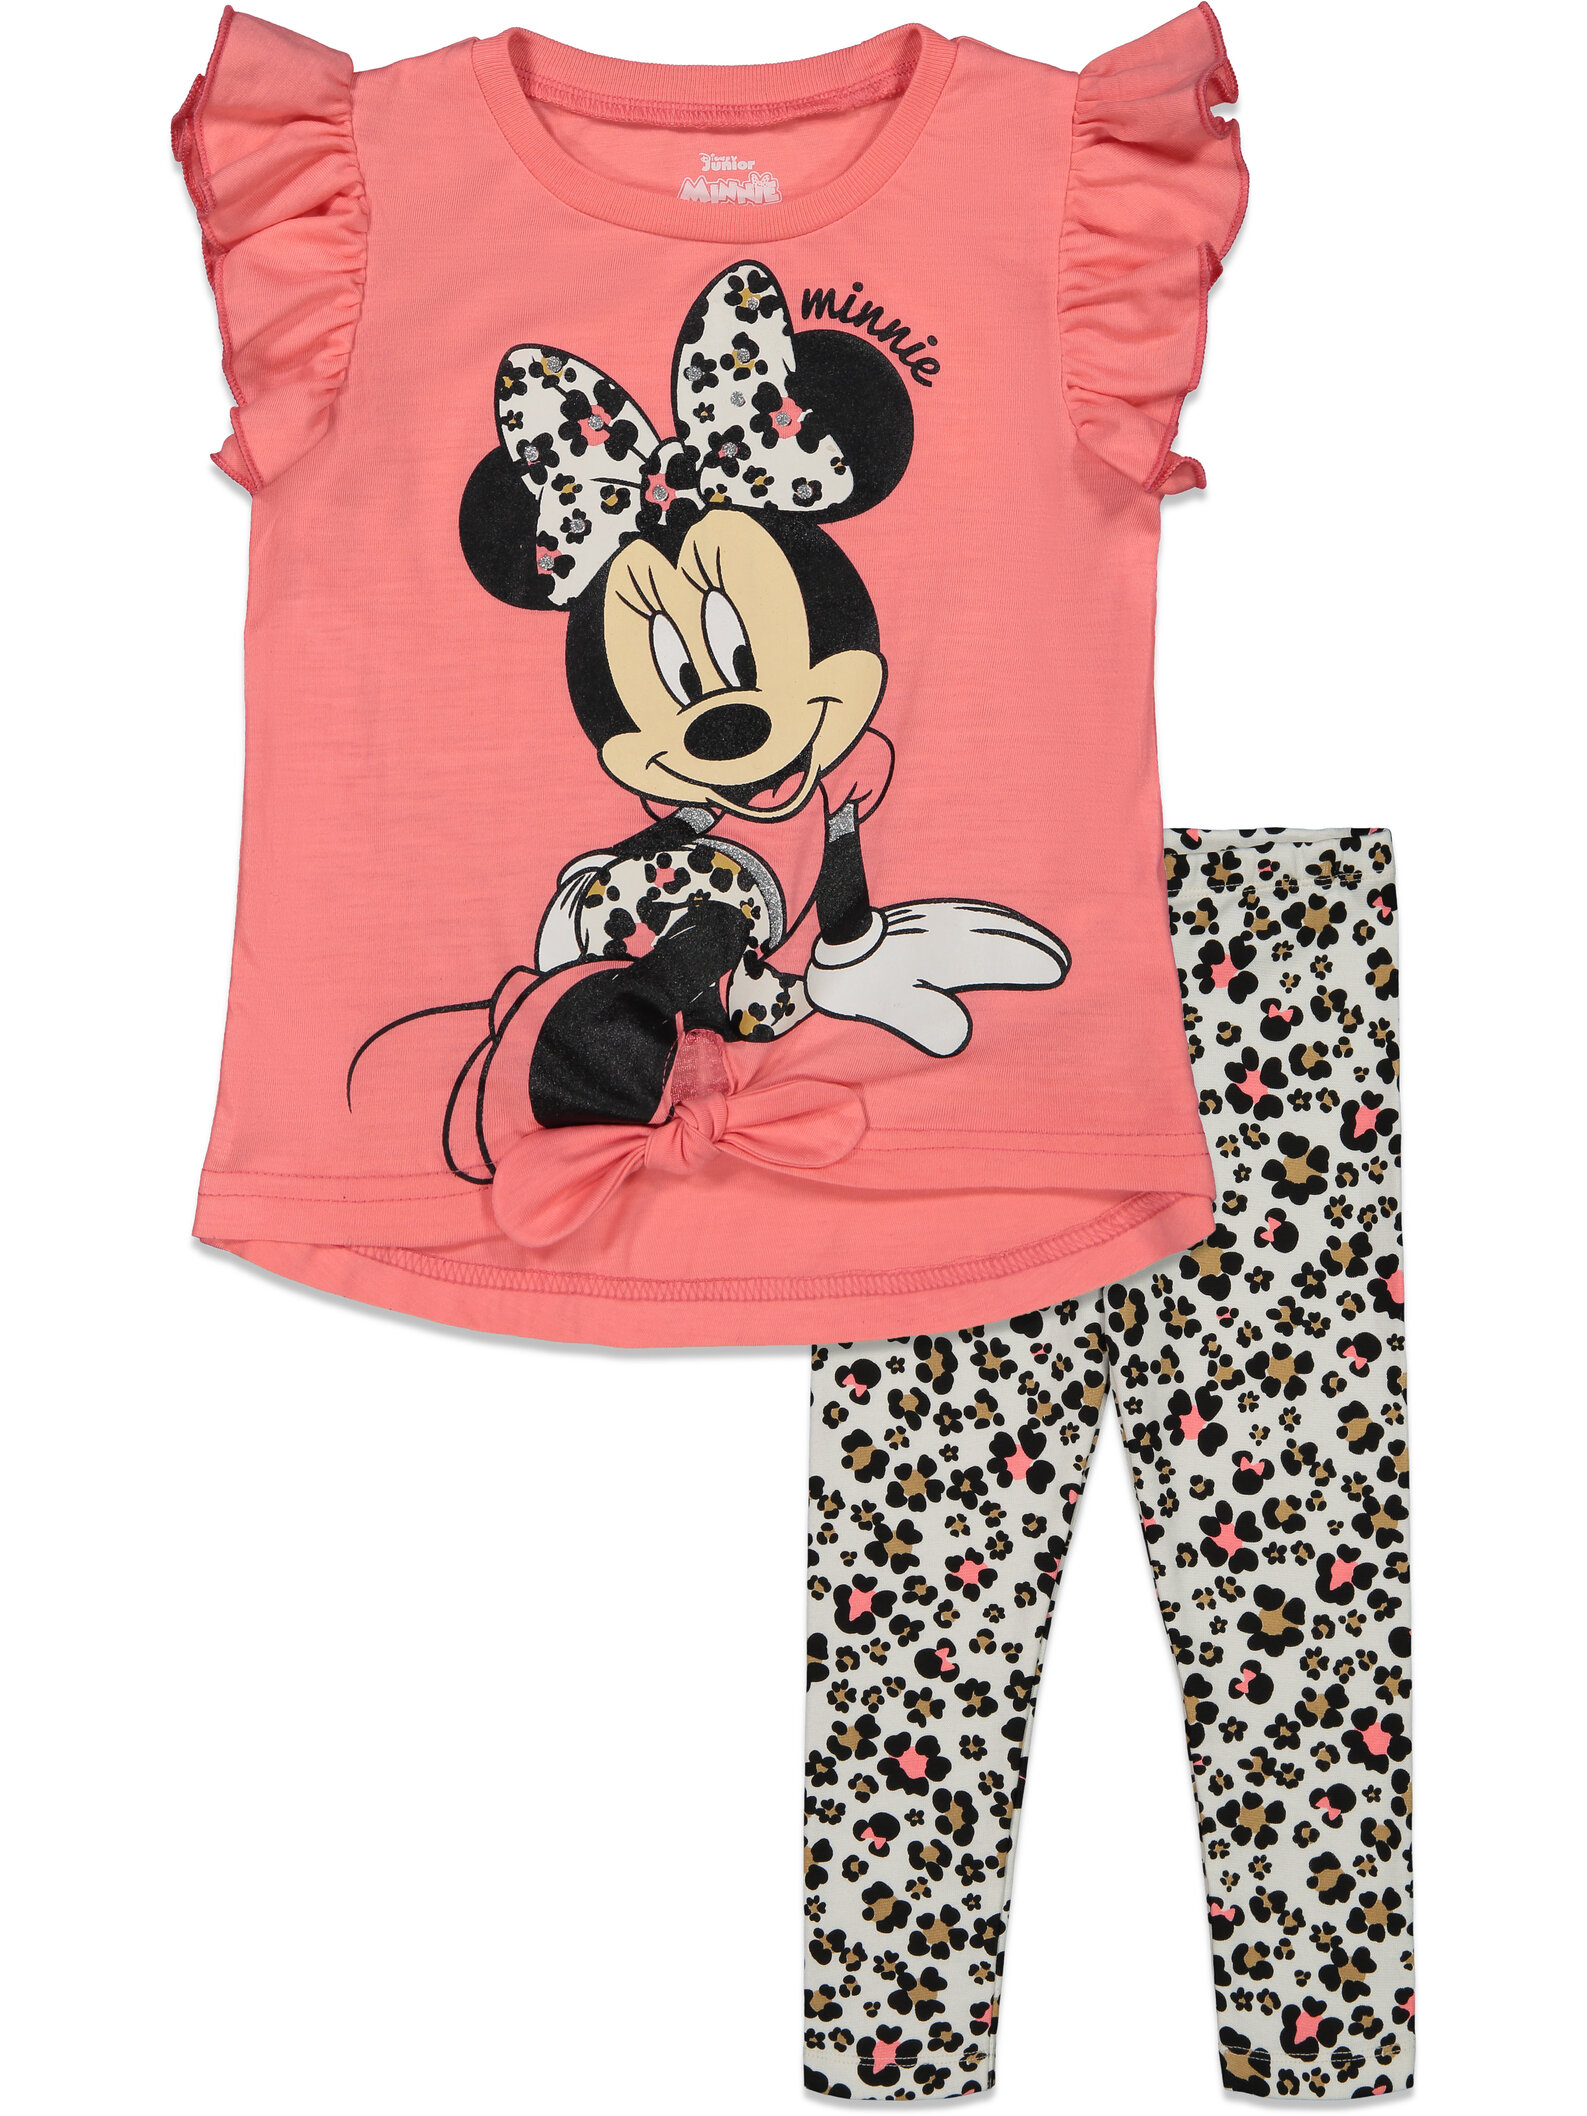 Disney Minnie Mouse Mickey Mouse T-Shirt Dress and Leggings Outfit Set Infant to Big Kid - image 1 of 5